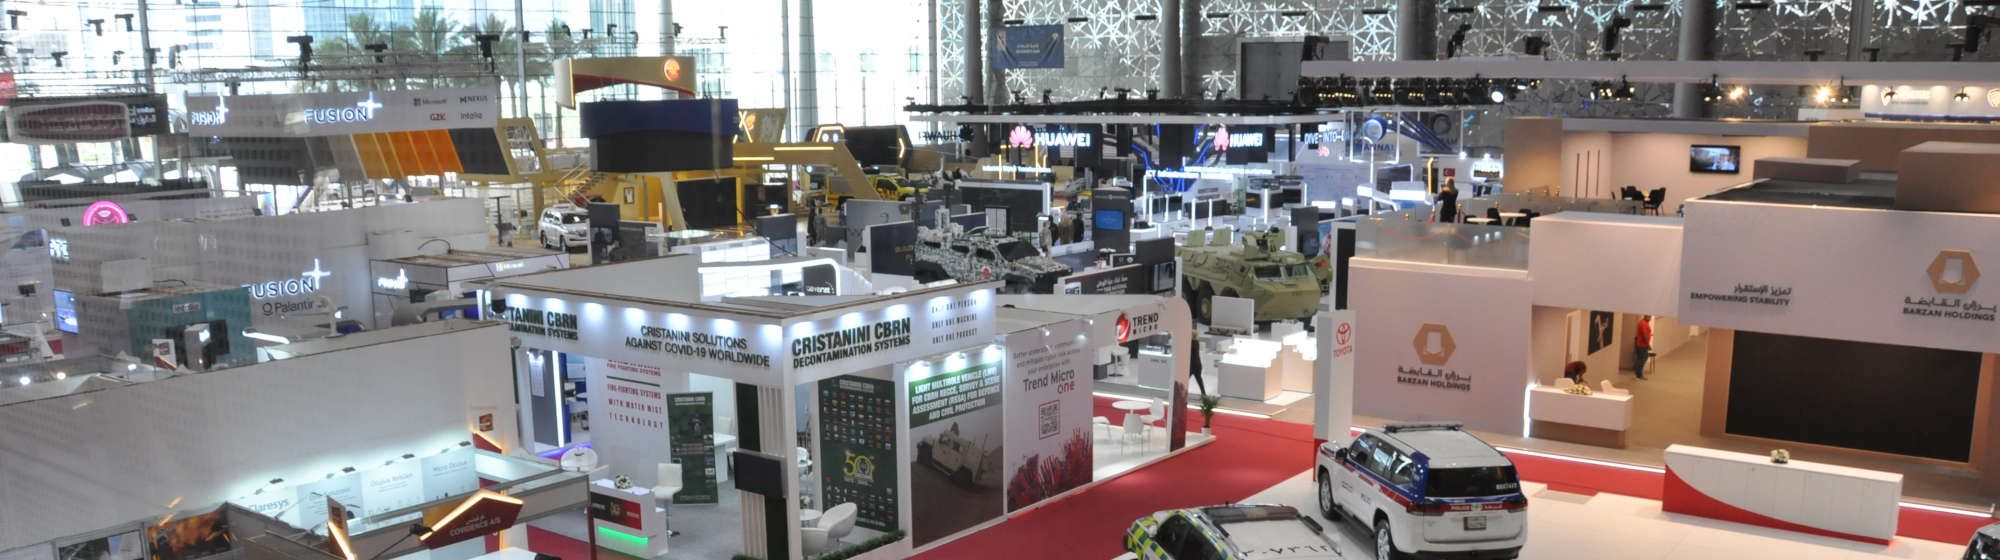 Aerial view of stands at Milipol Qatar, international event for homeland security and civil defence in the Middle East